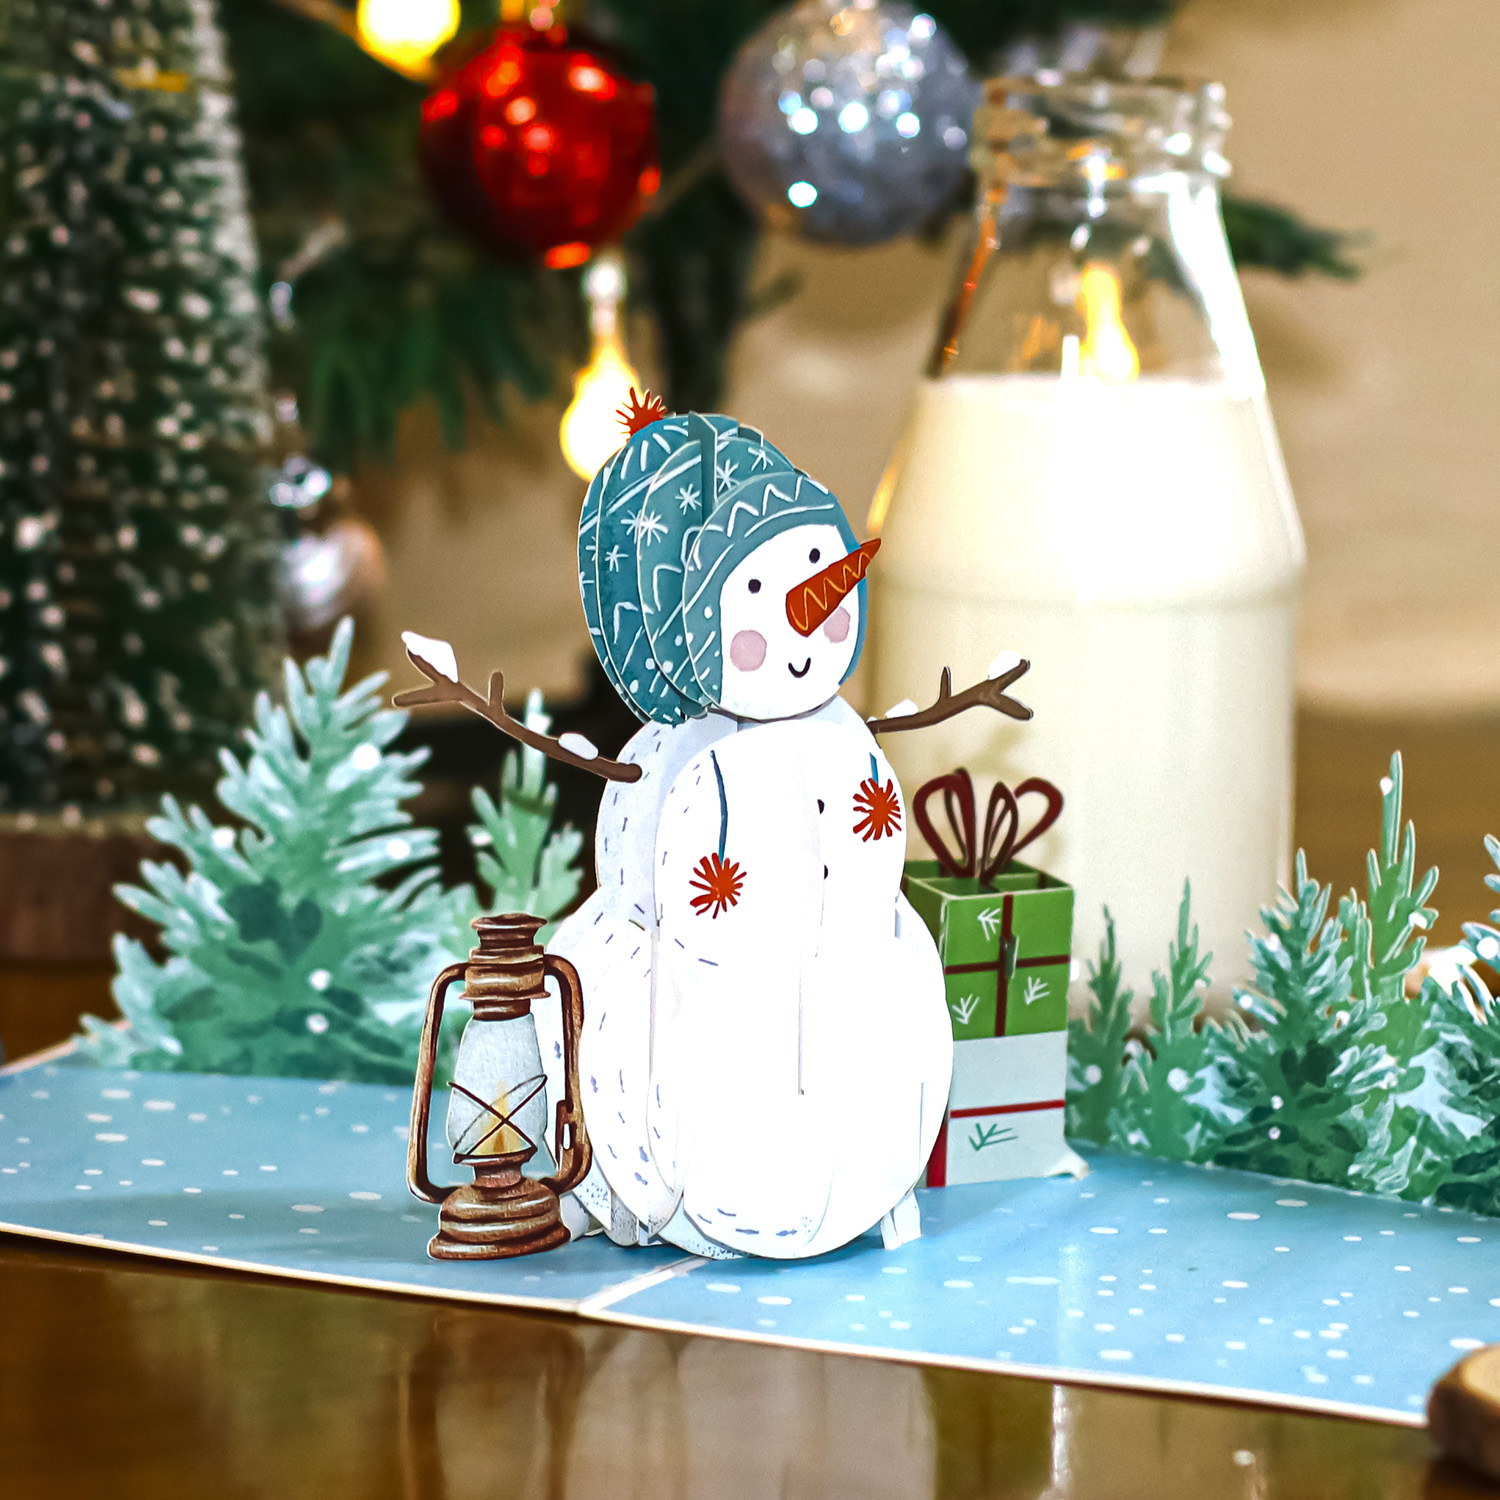 Pop-up-xmas-cards-christmas-pop-up-card-wholesale-manufacturer-from-Vietnam-pop-up-holiday-cards-pop-out-christmas-cards-3d-pop-up-christmas-cards